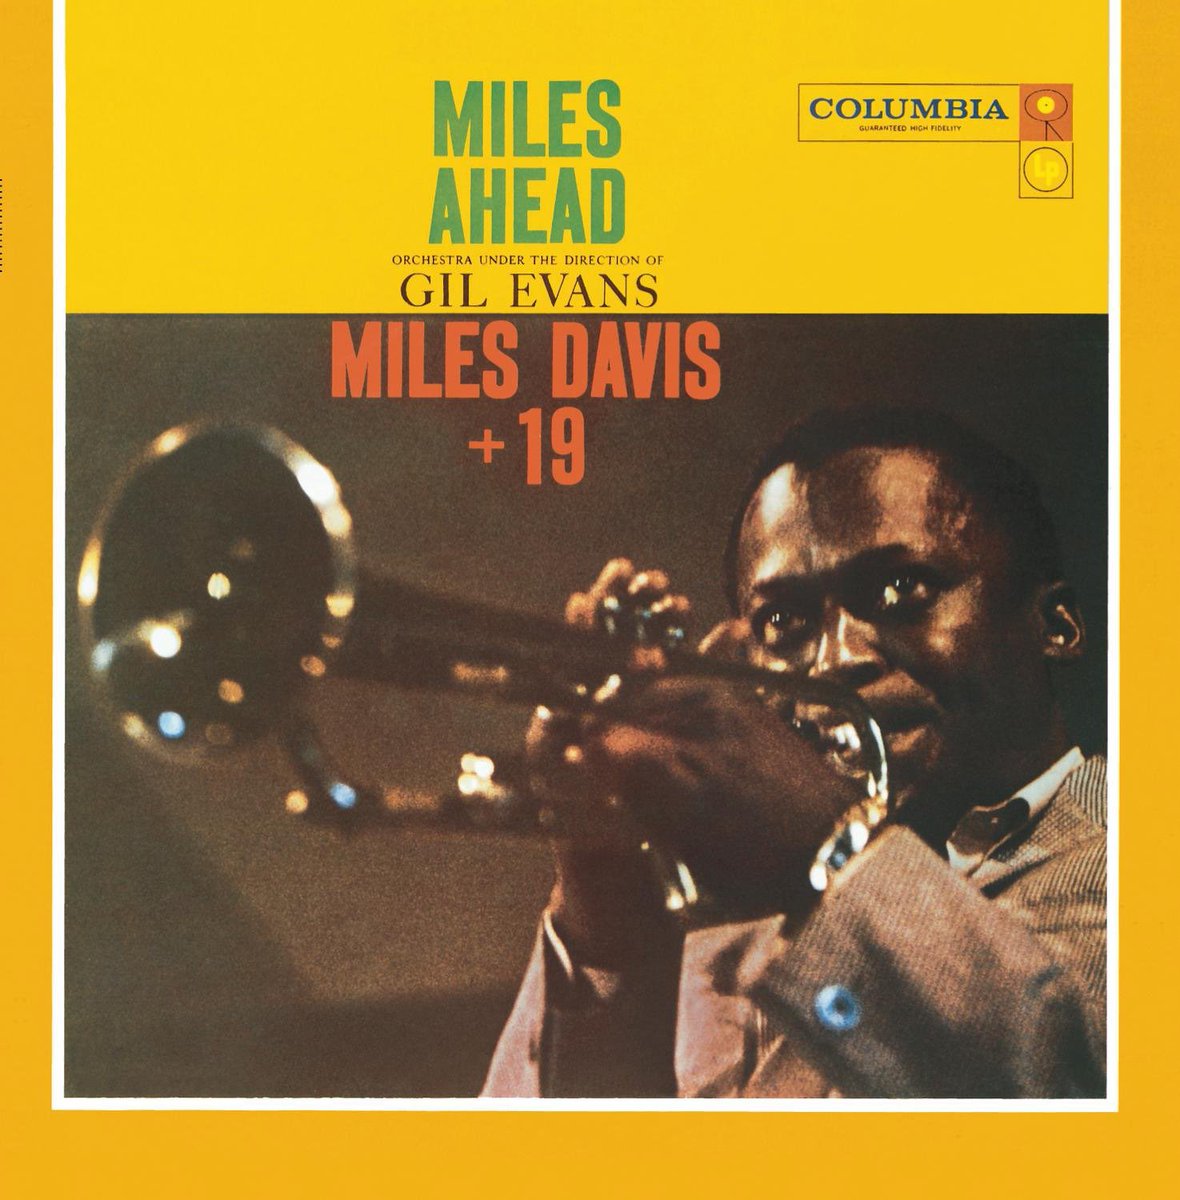 Miles told Columbia records to stop putting white women on his album covers.